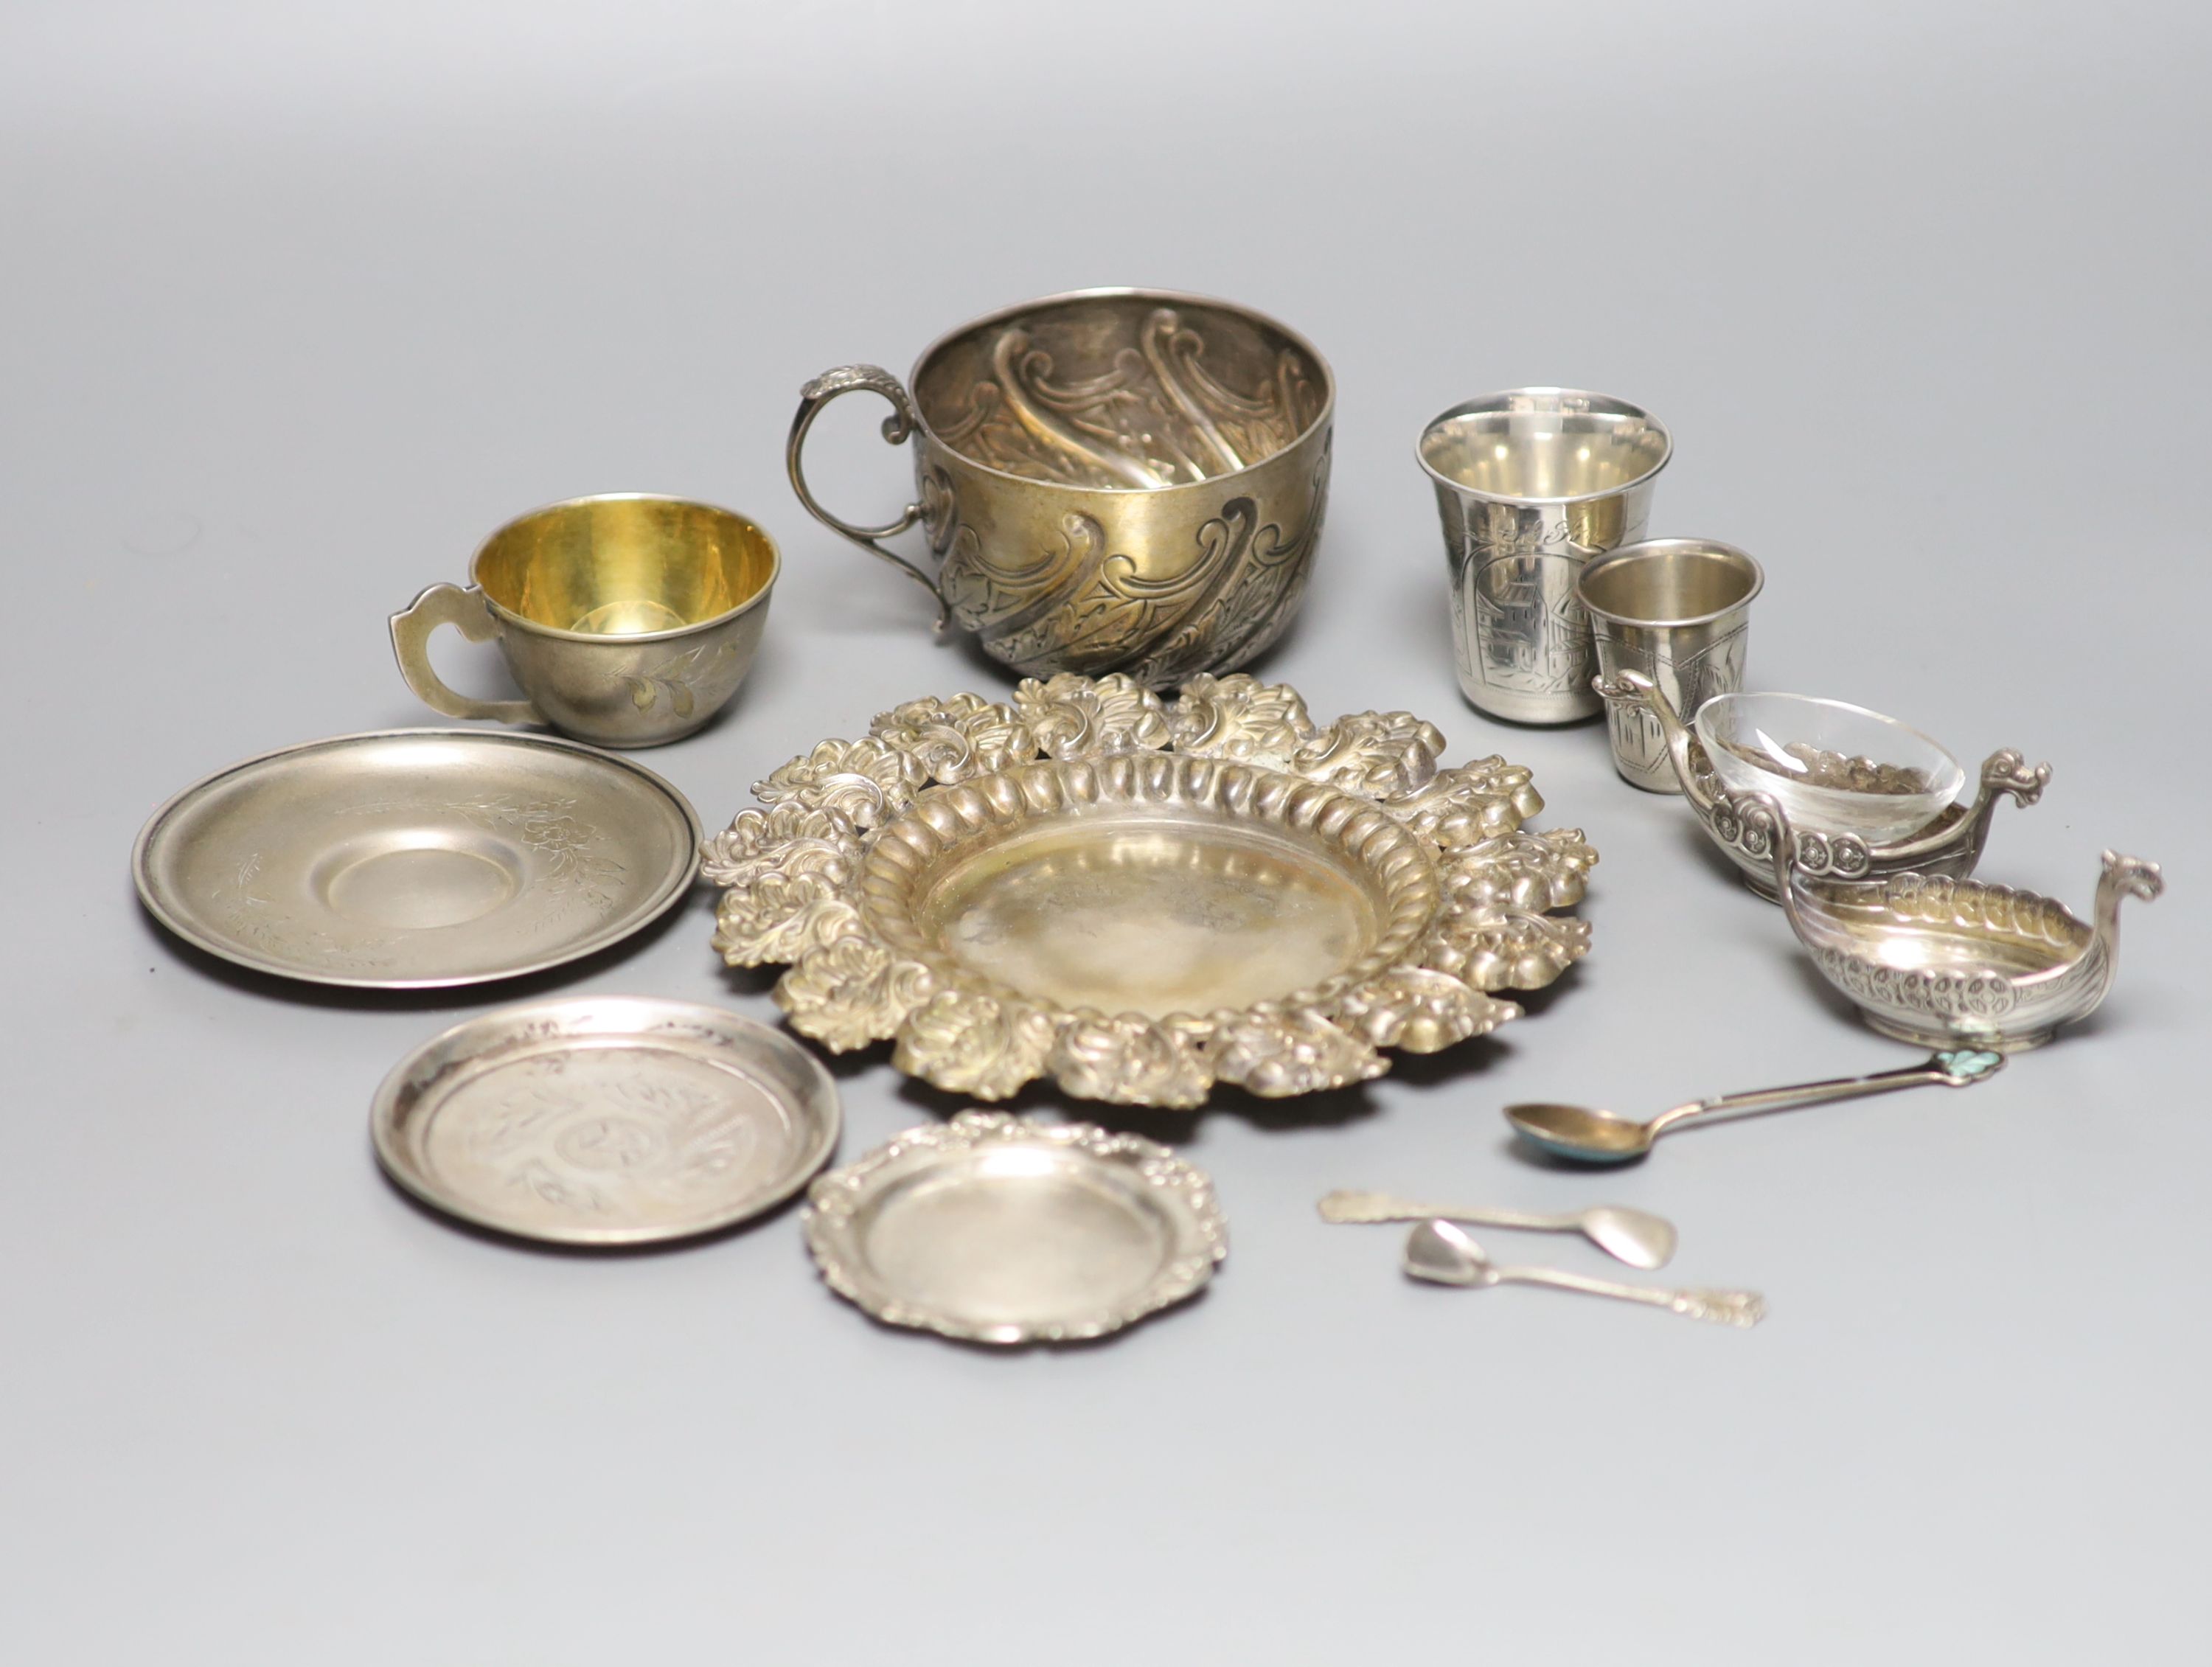 A small group of late 19th/early 20th century Russian 84 zolotnik items